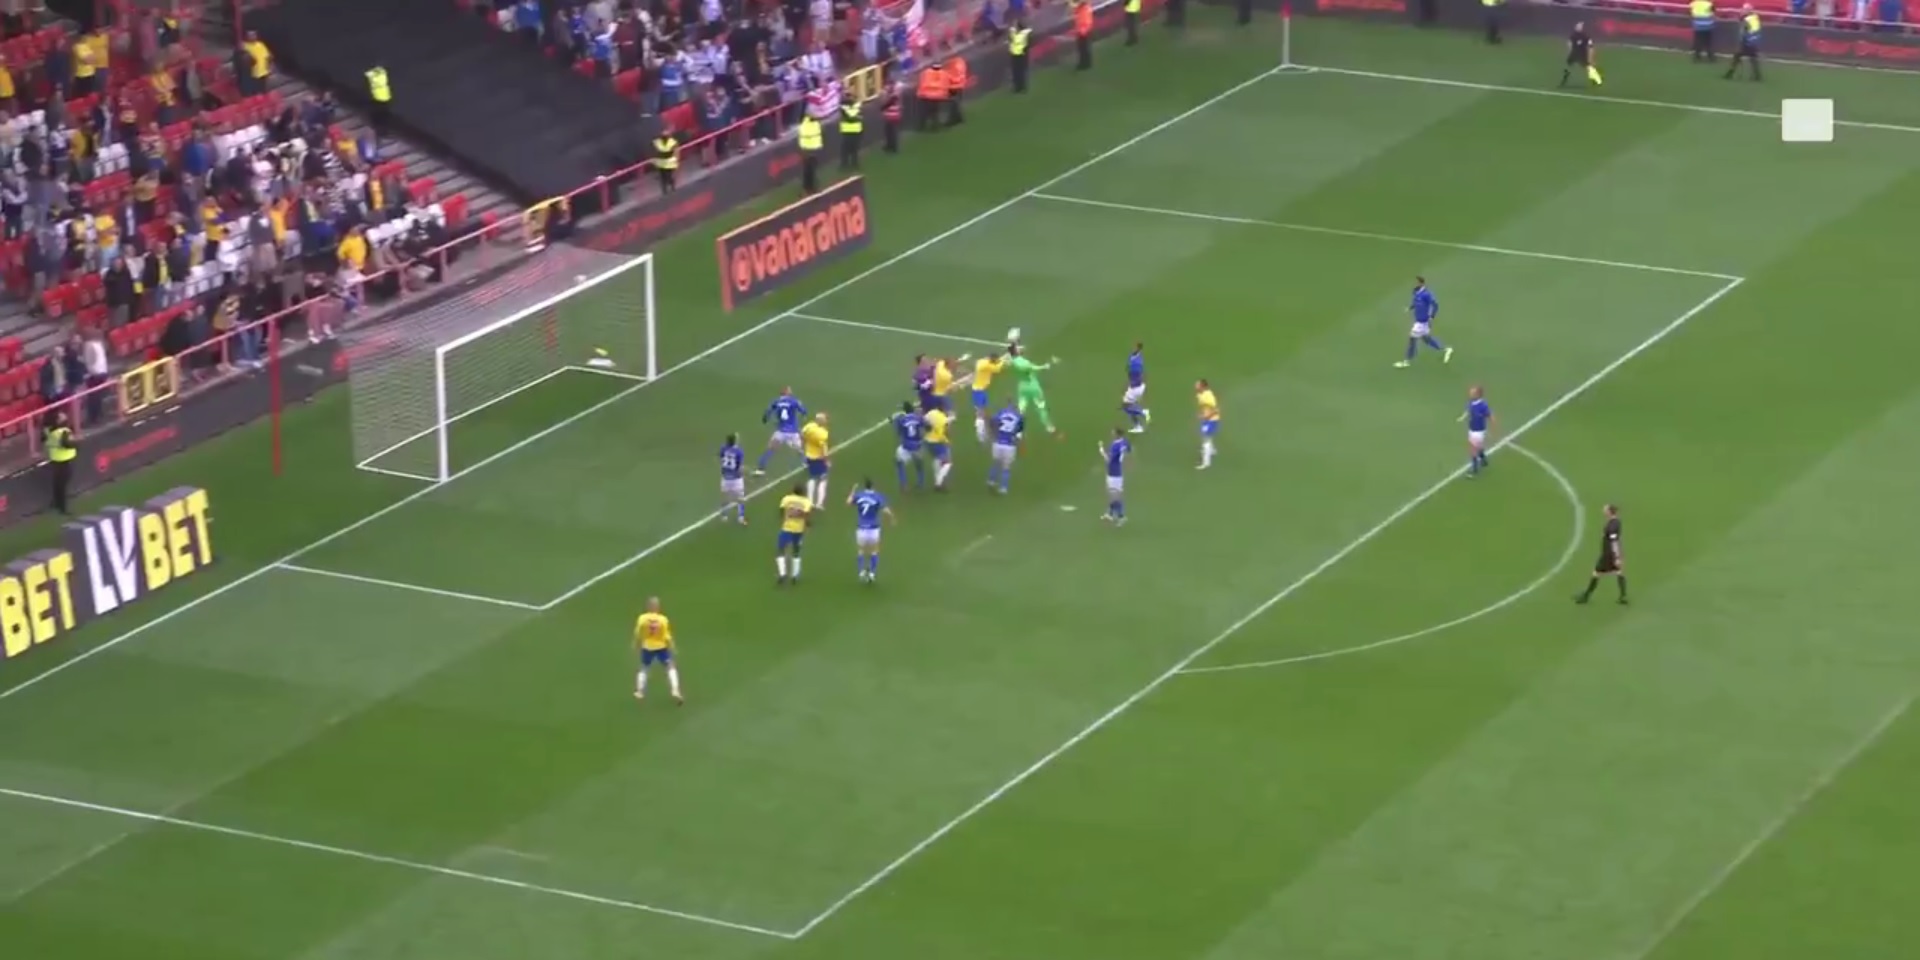 (Video) Goalkeeper scores dramatic Alisson-esque goal in last minute of play-off final